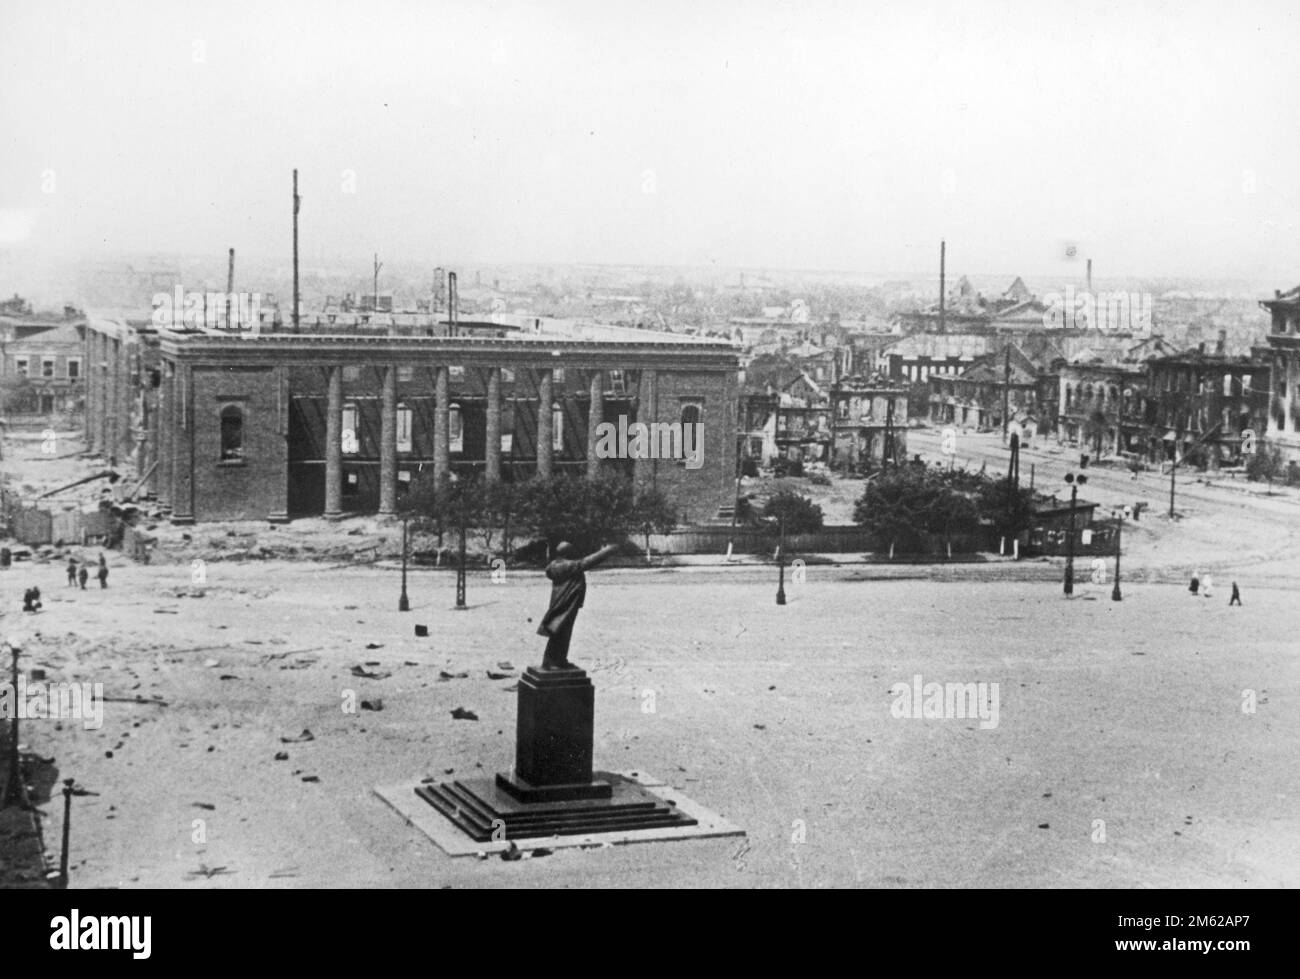 A part of the destroyed city of Voronezh in Russia during Operation Barbarossa, the nazi invasion of the Soviet Union. A square with a monument to Vladimir Lenin is visible in the foreground. Stock Photo